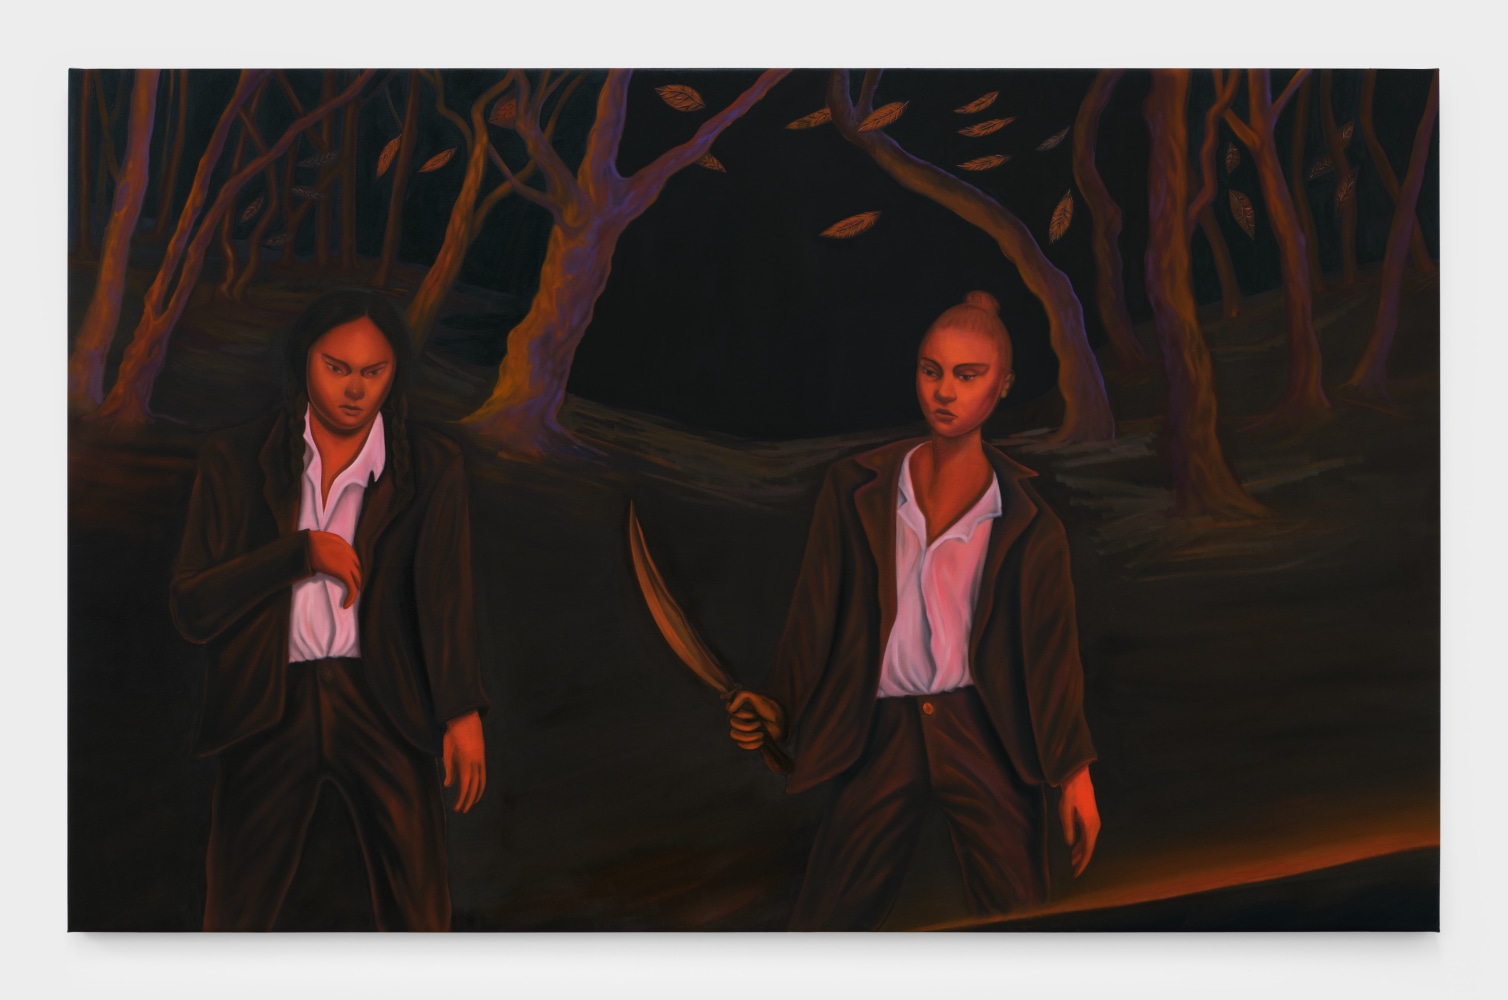 Bambou Gili's artwork &quot;Goodfellas&quot;, 47 x 75 3/4 in (119.4 x 192.4 cm), oil on linen, 2022